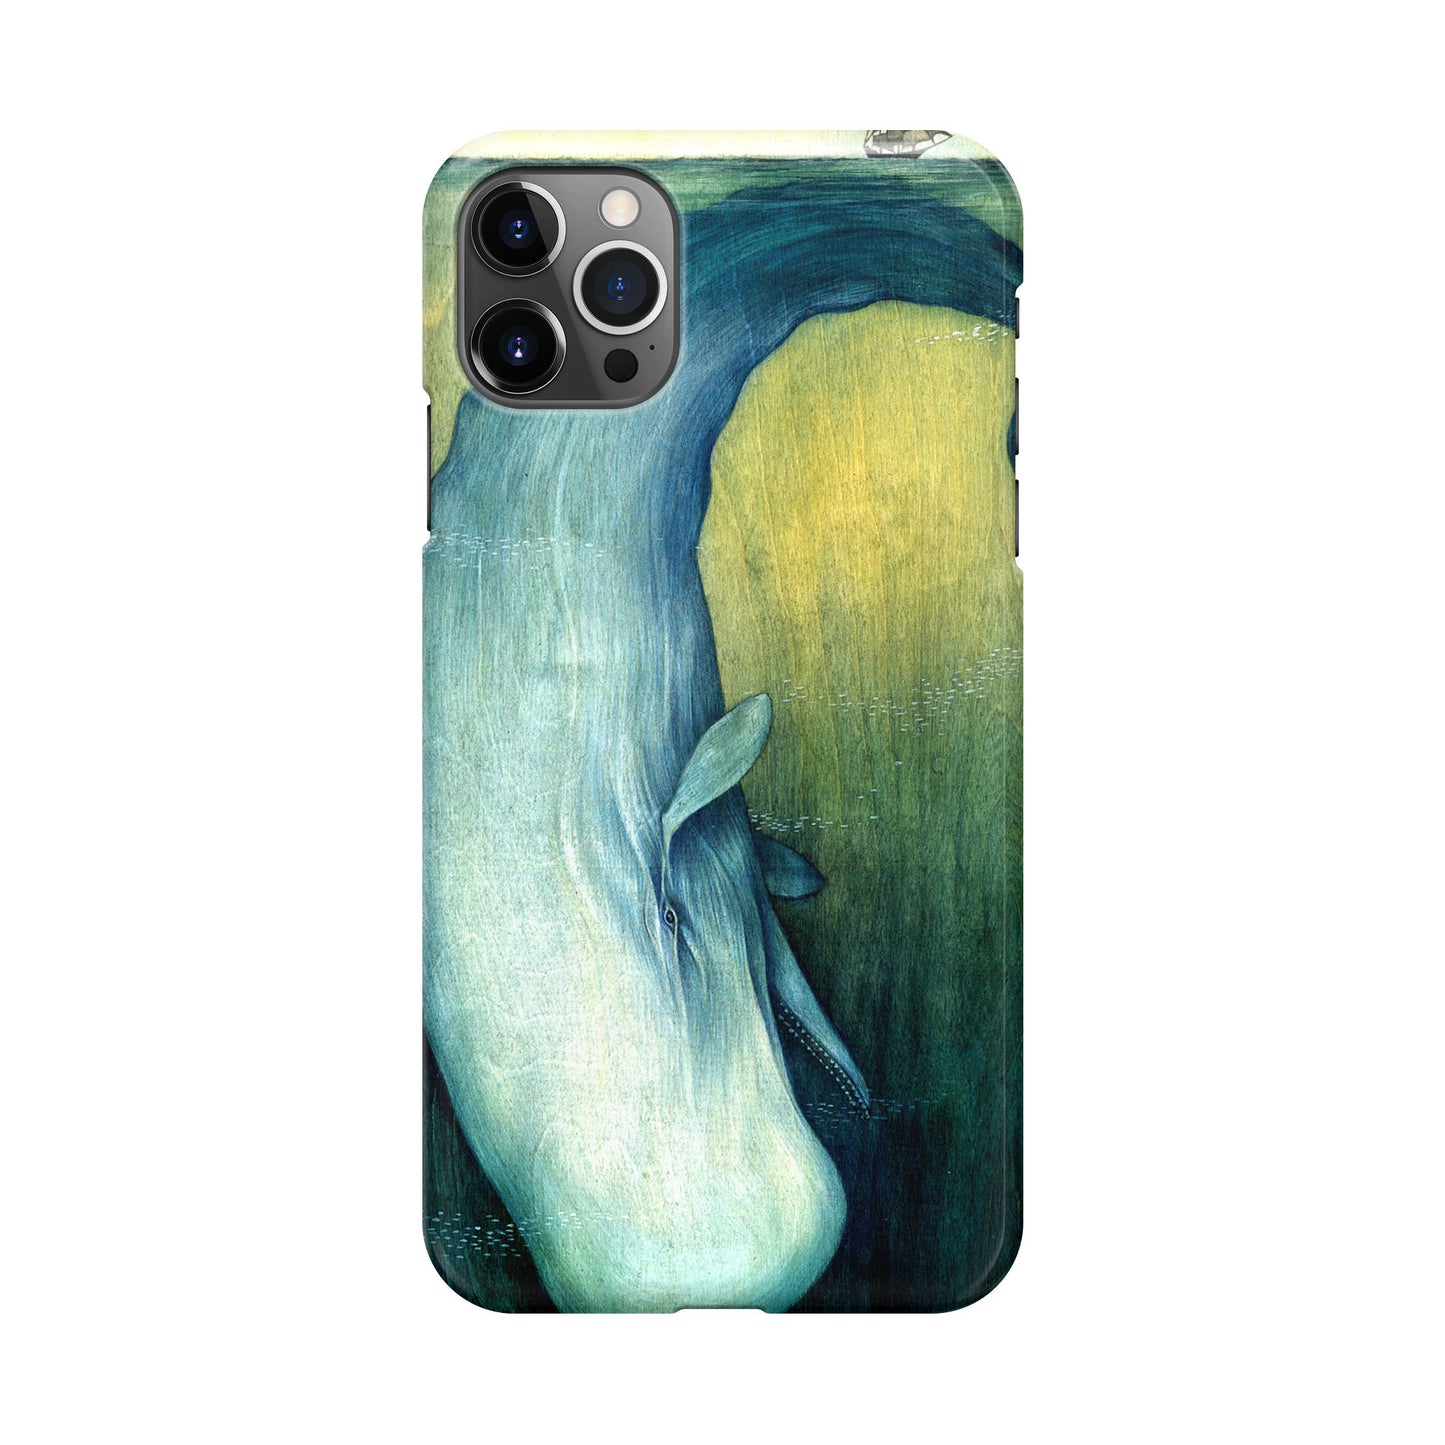 Moby Dick iPhone 12 Pro Max Case